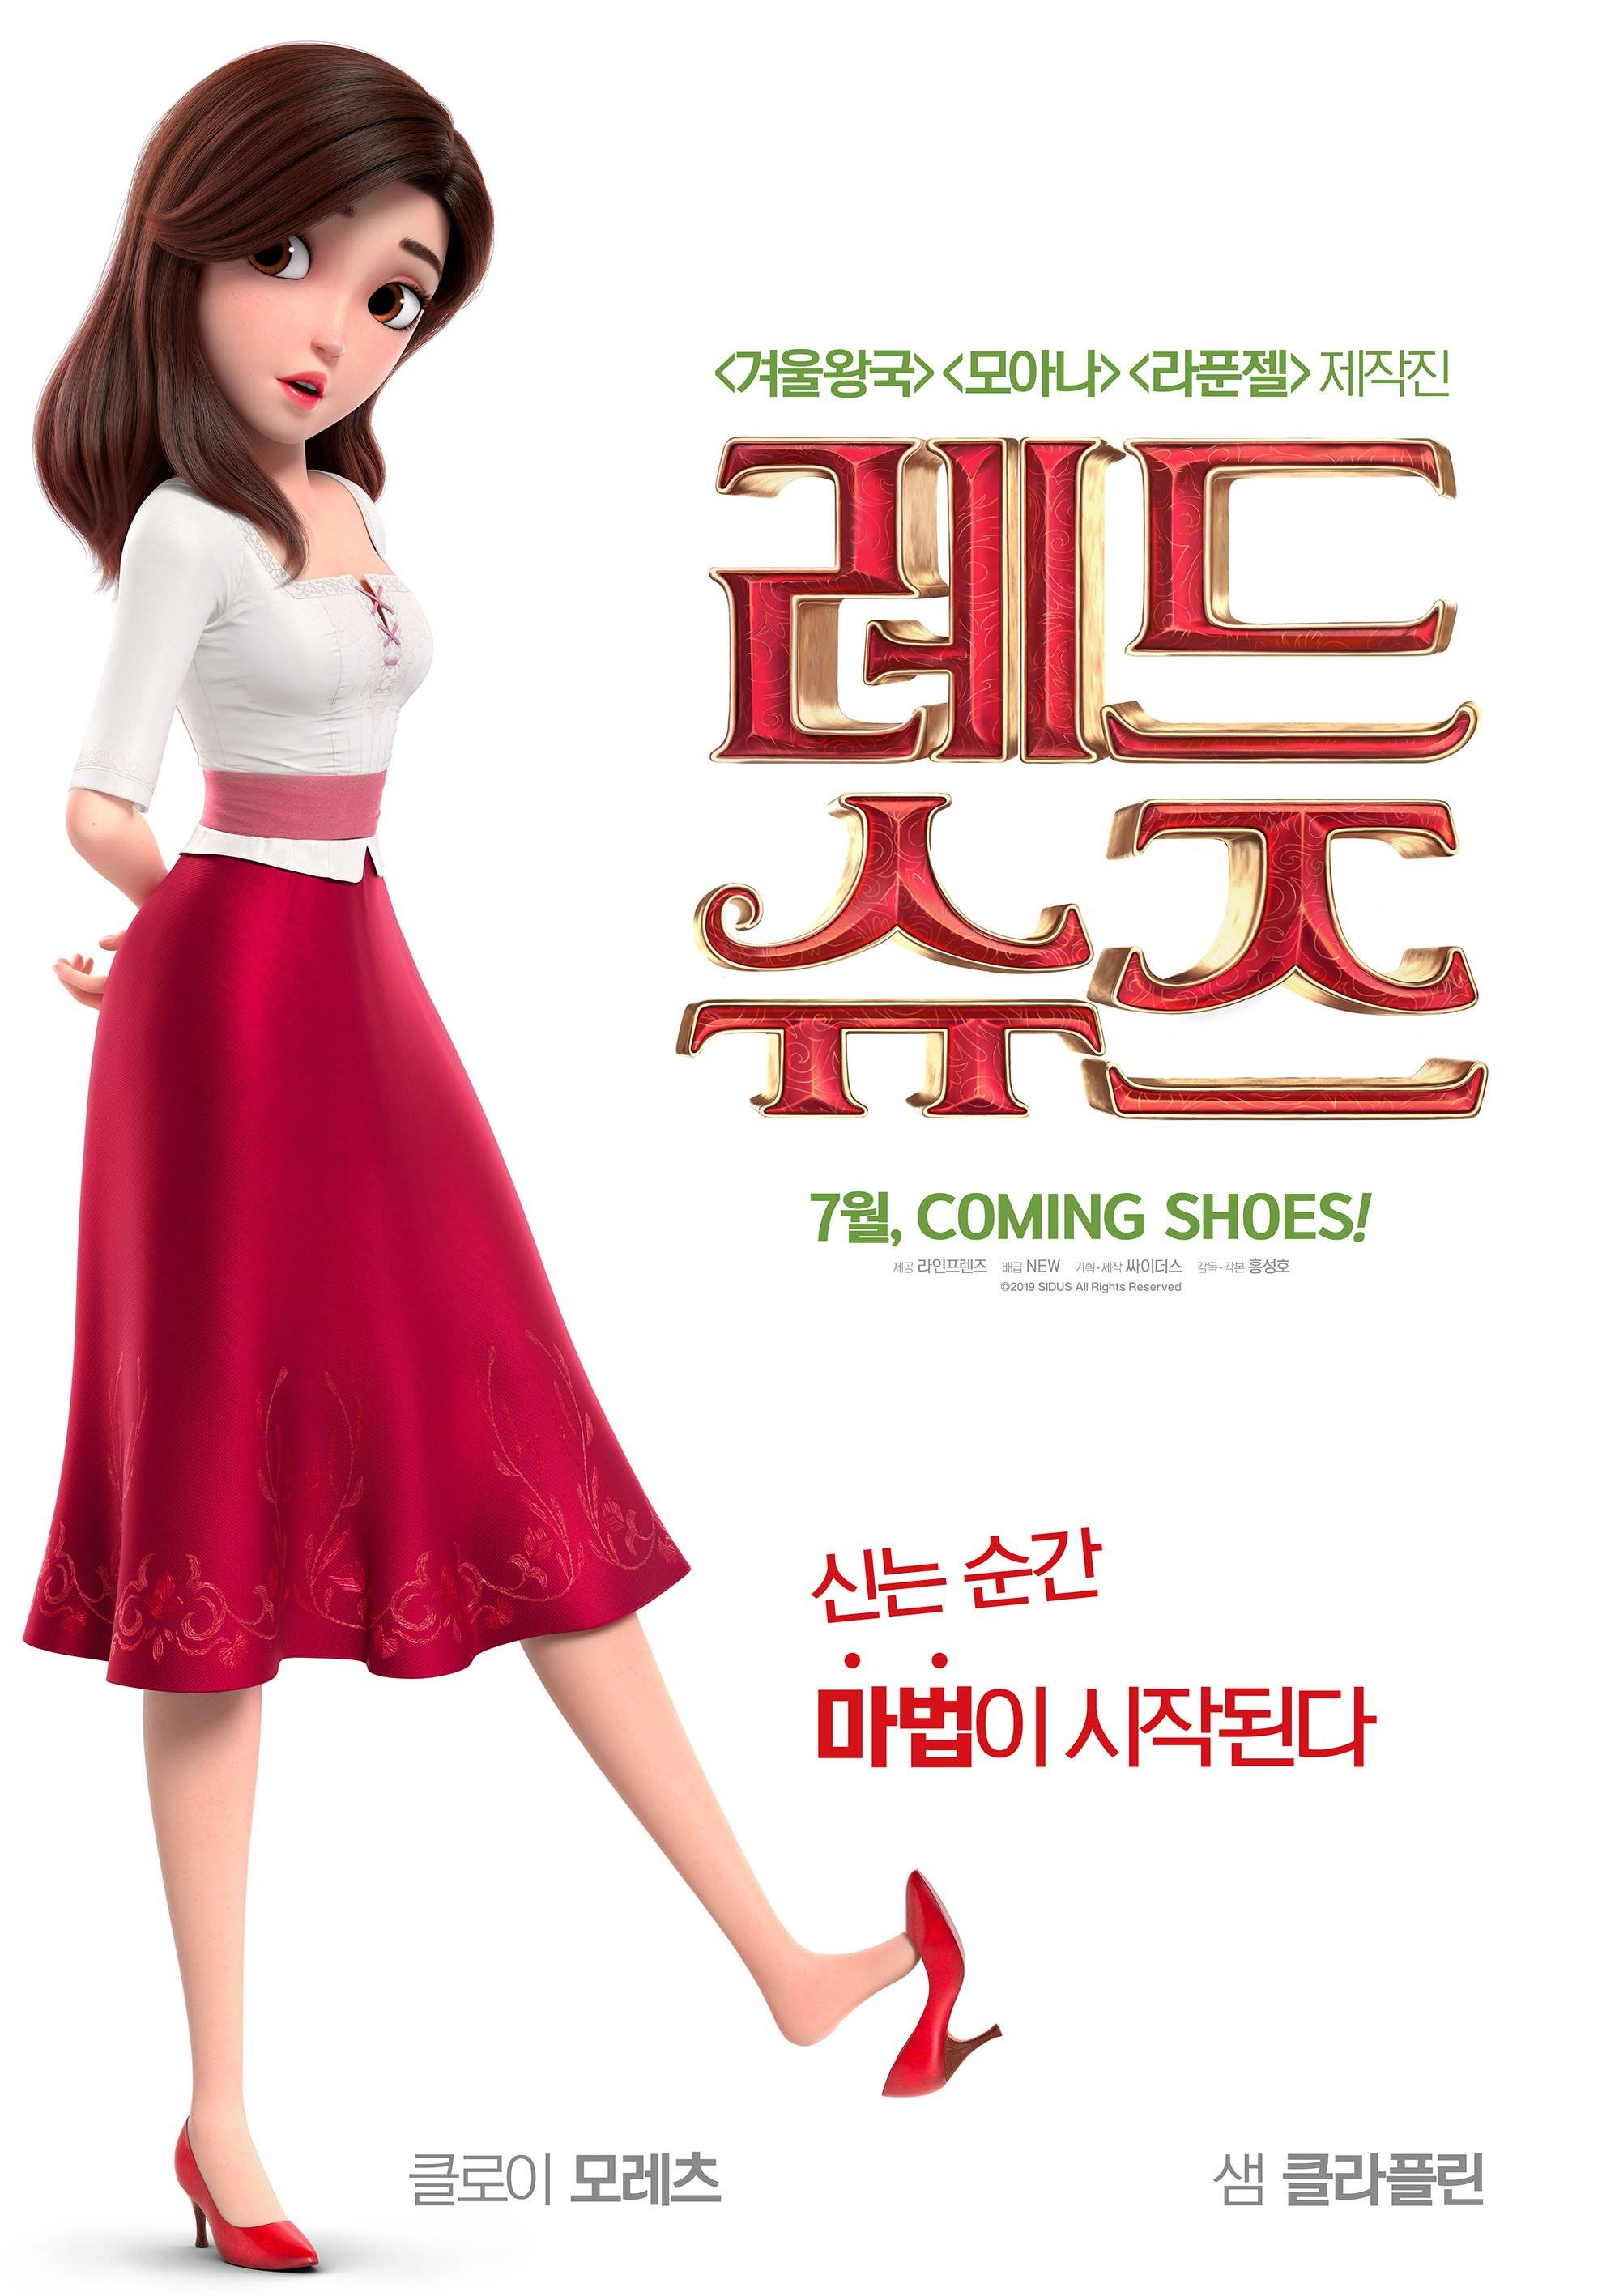 39 Top Photos Red Shoes Movie Korean : The Red Shoes | Sleepy Panda Dreams